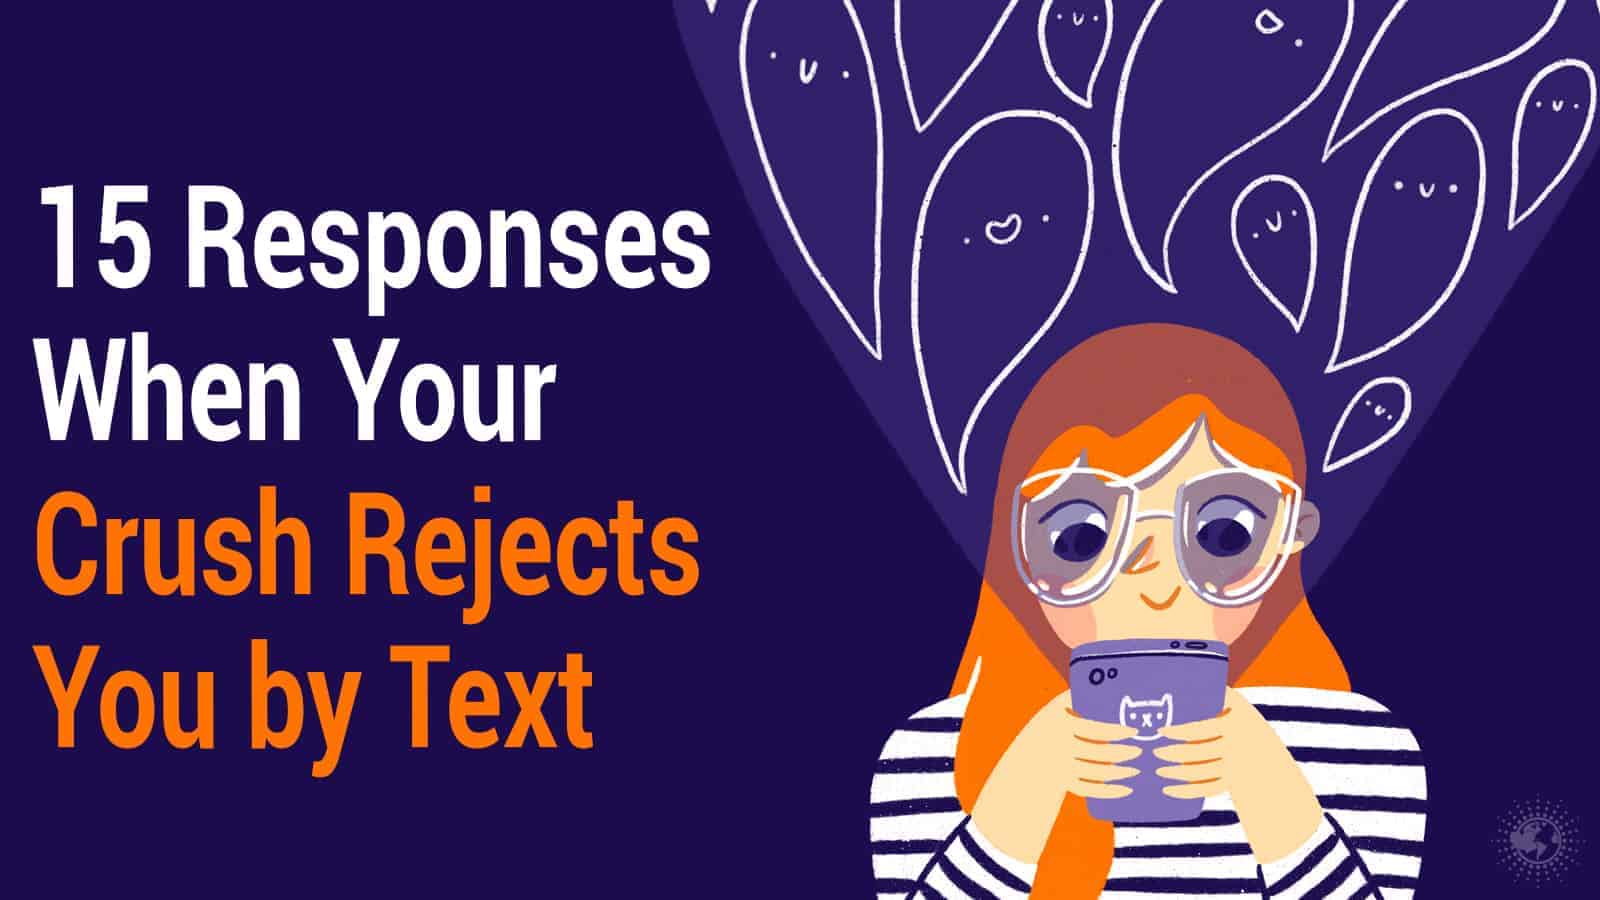 15 Responses When Your Crush Rejects You By Text